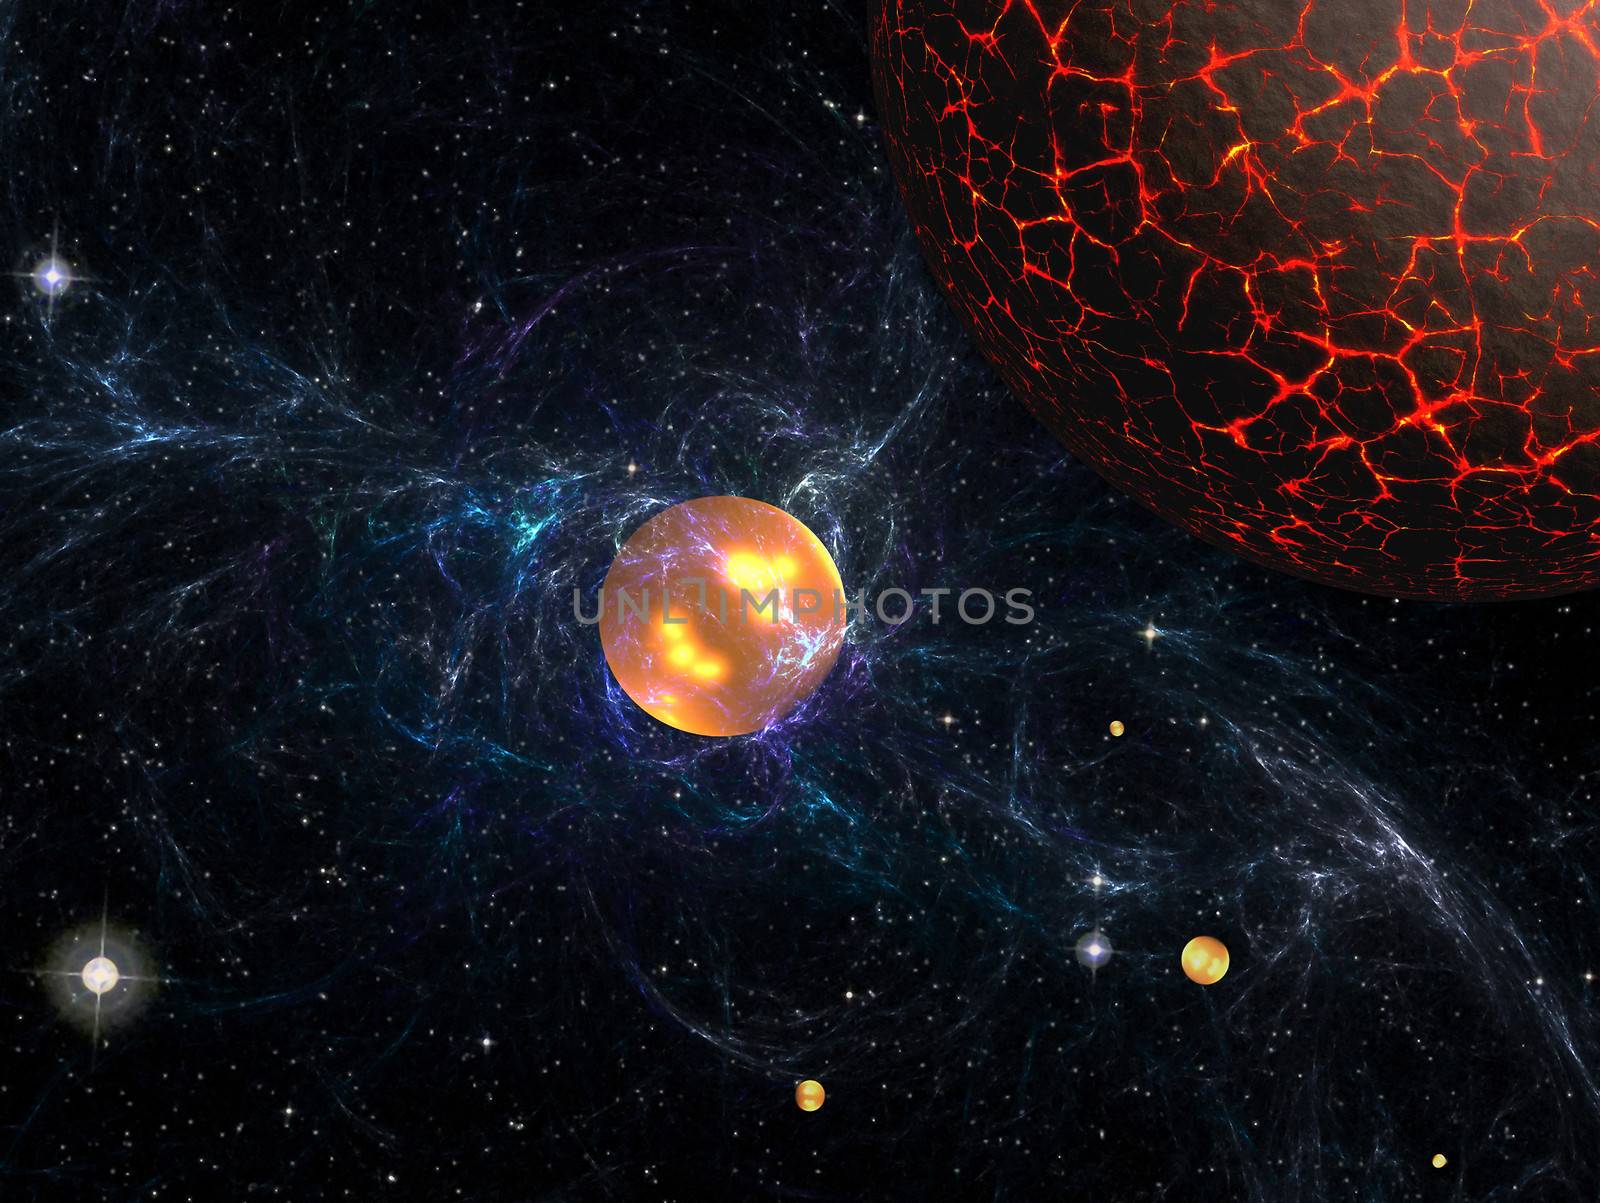 Image evidently showing physical processes of magnetic storm in depths of galaxy.